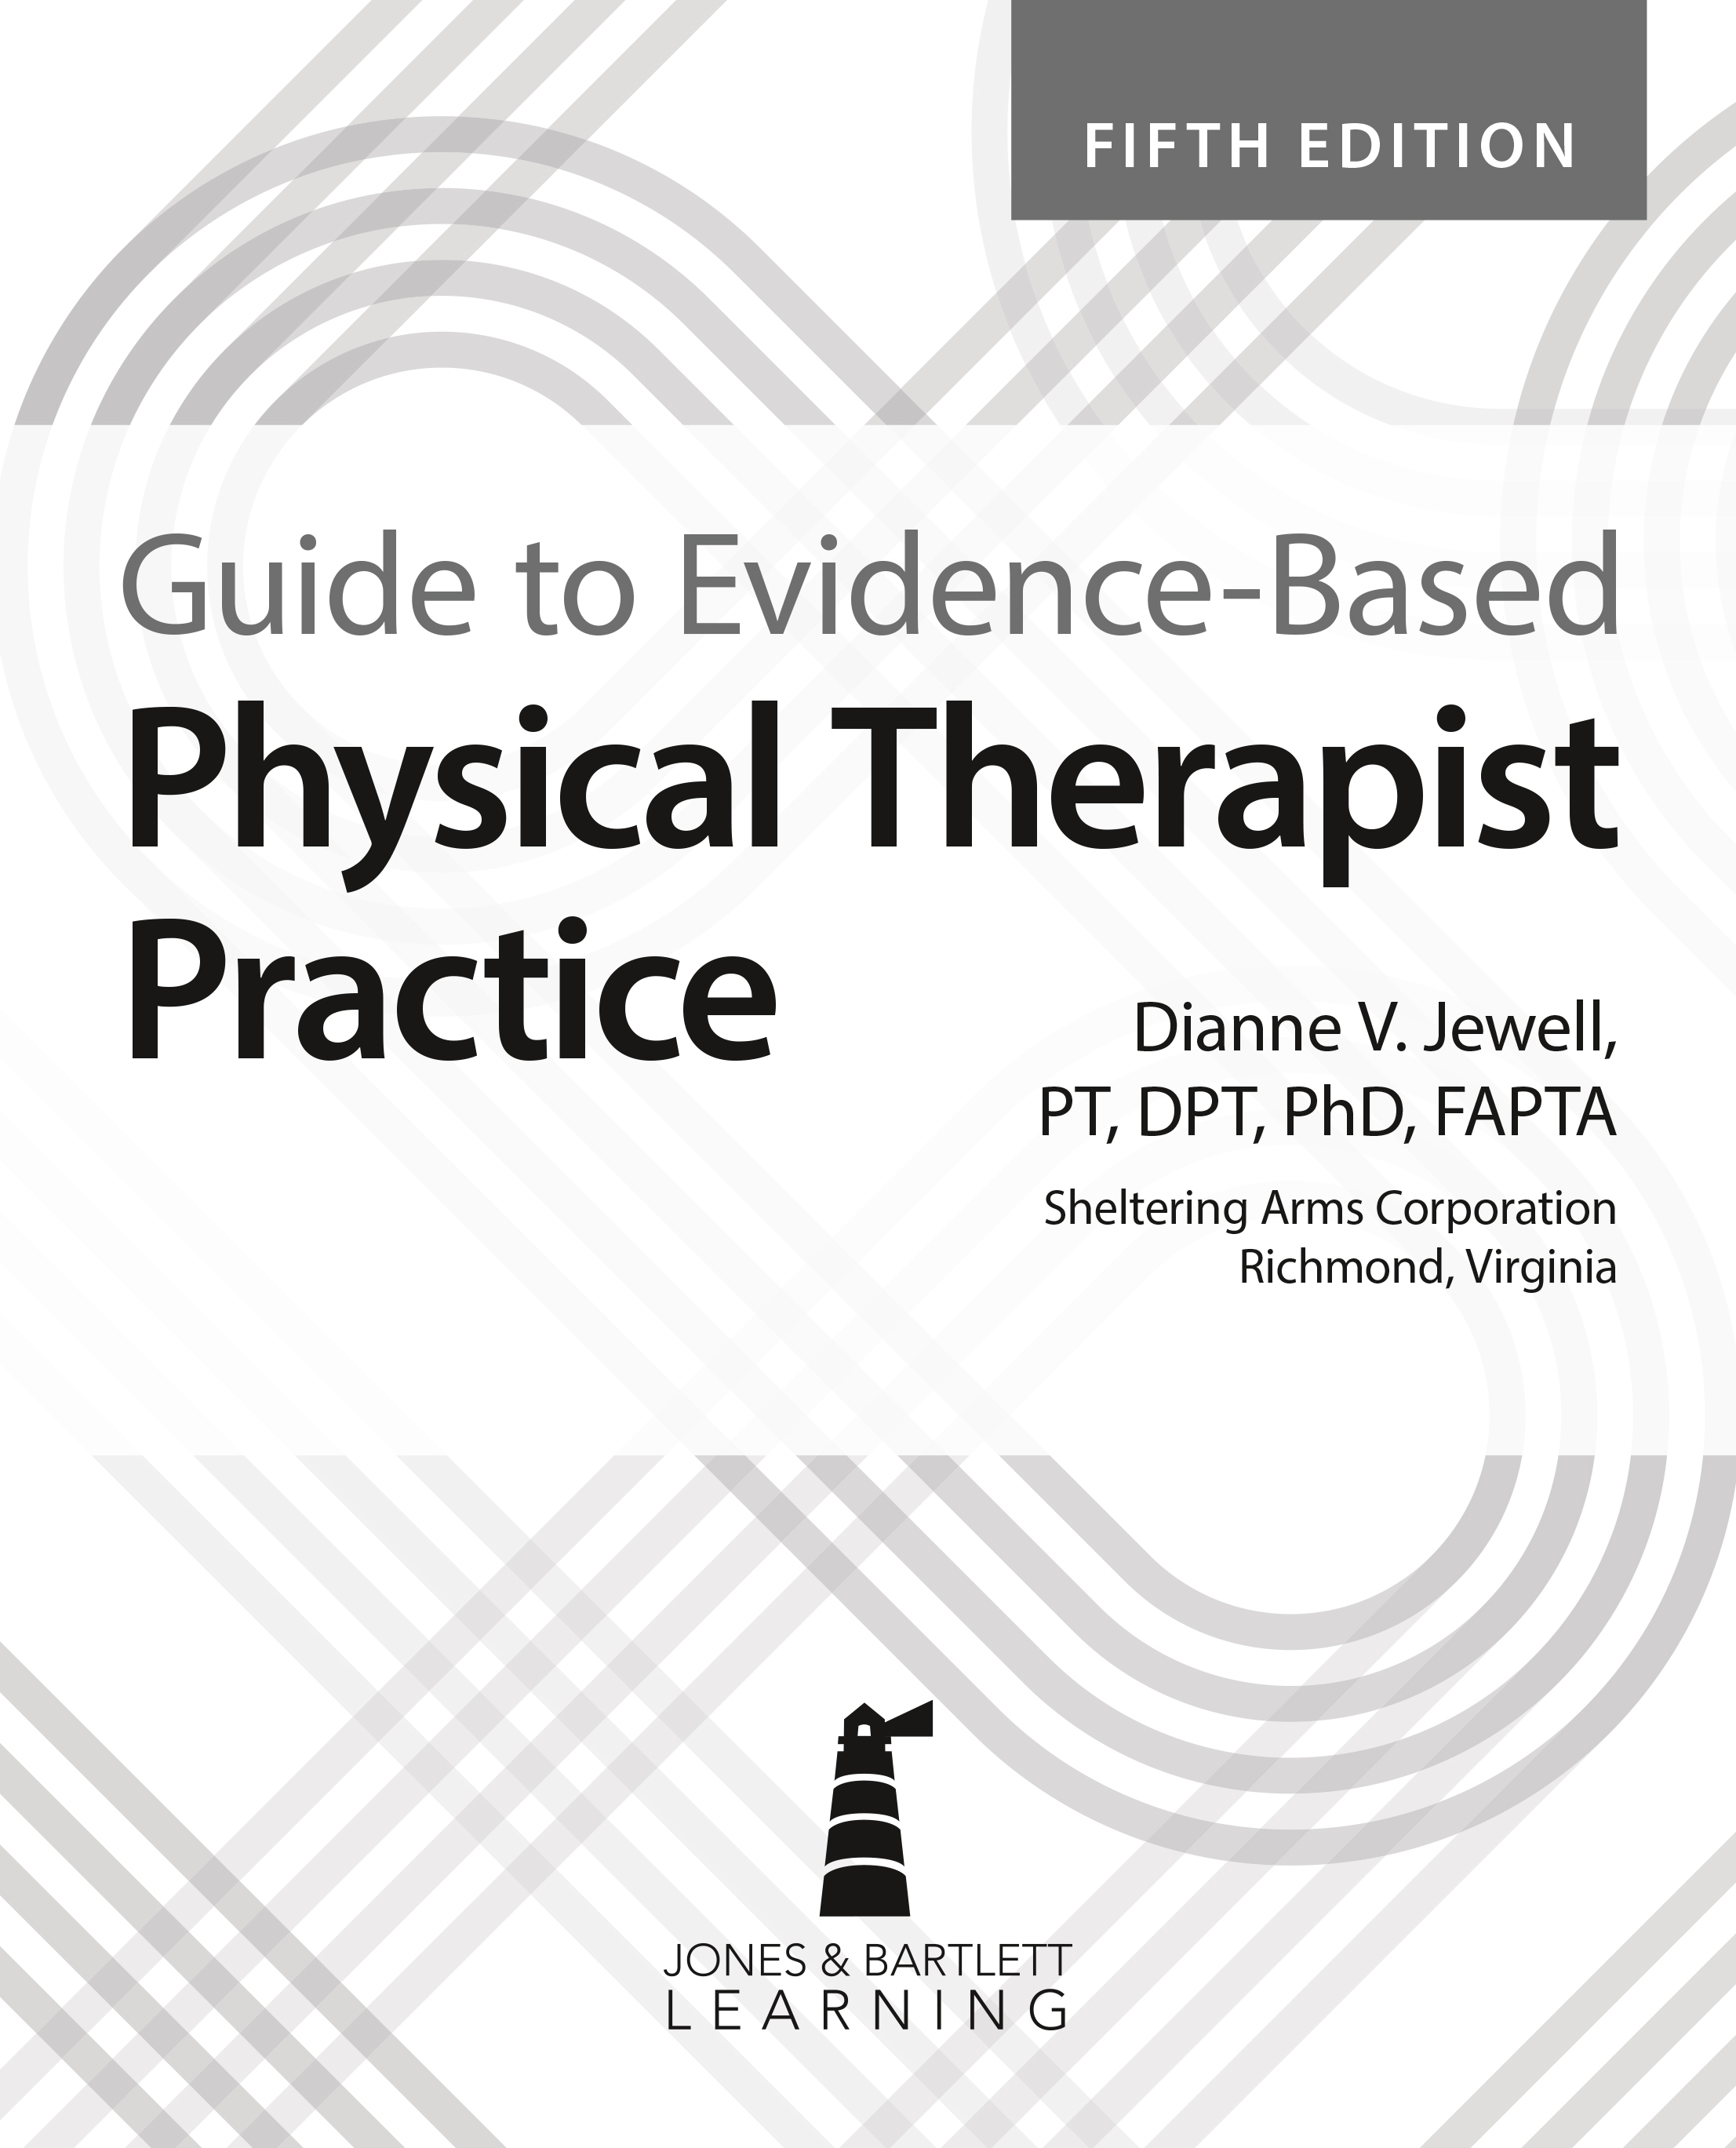 Guide to Evidence-Based Physical Therapist Practice - image 2